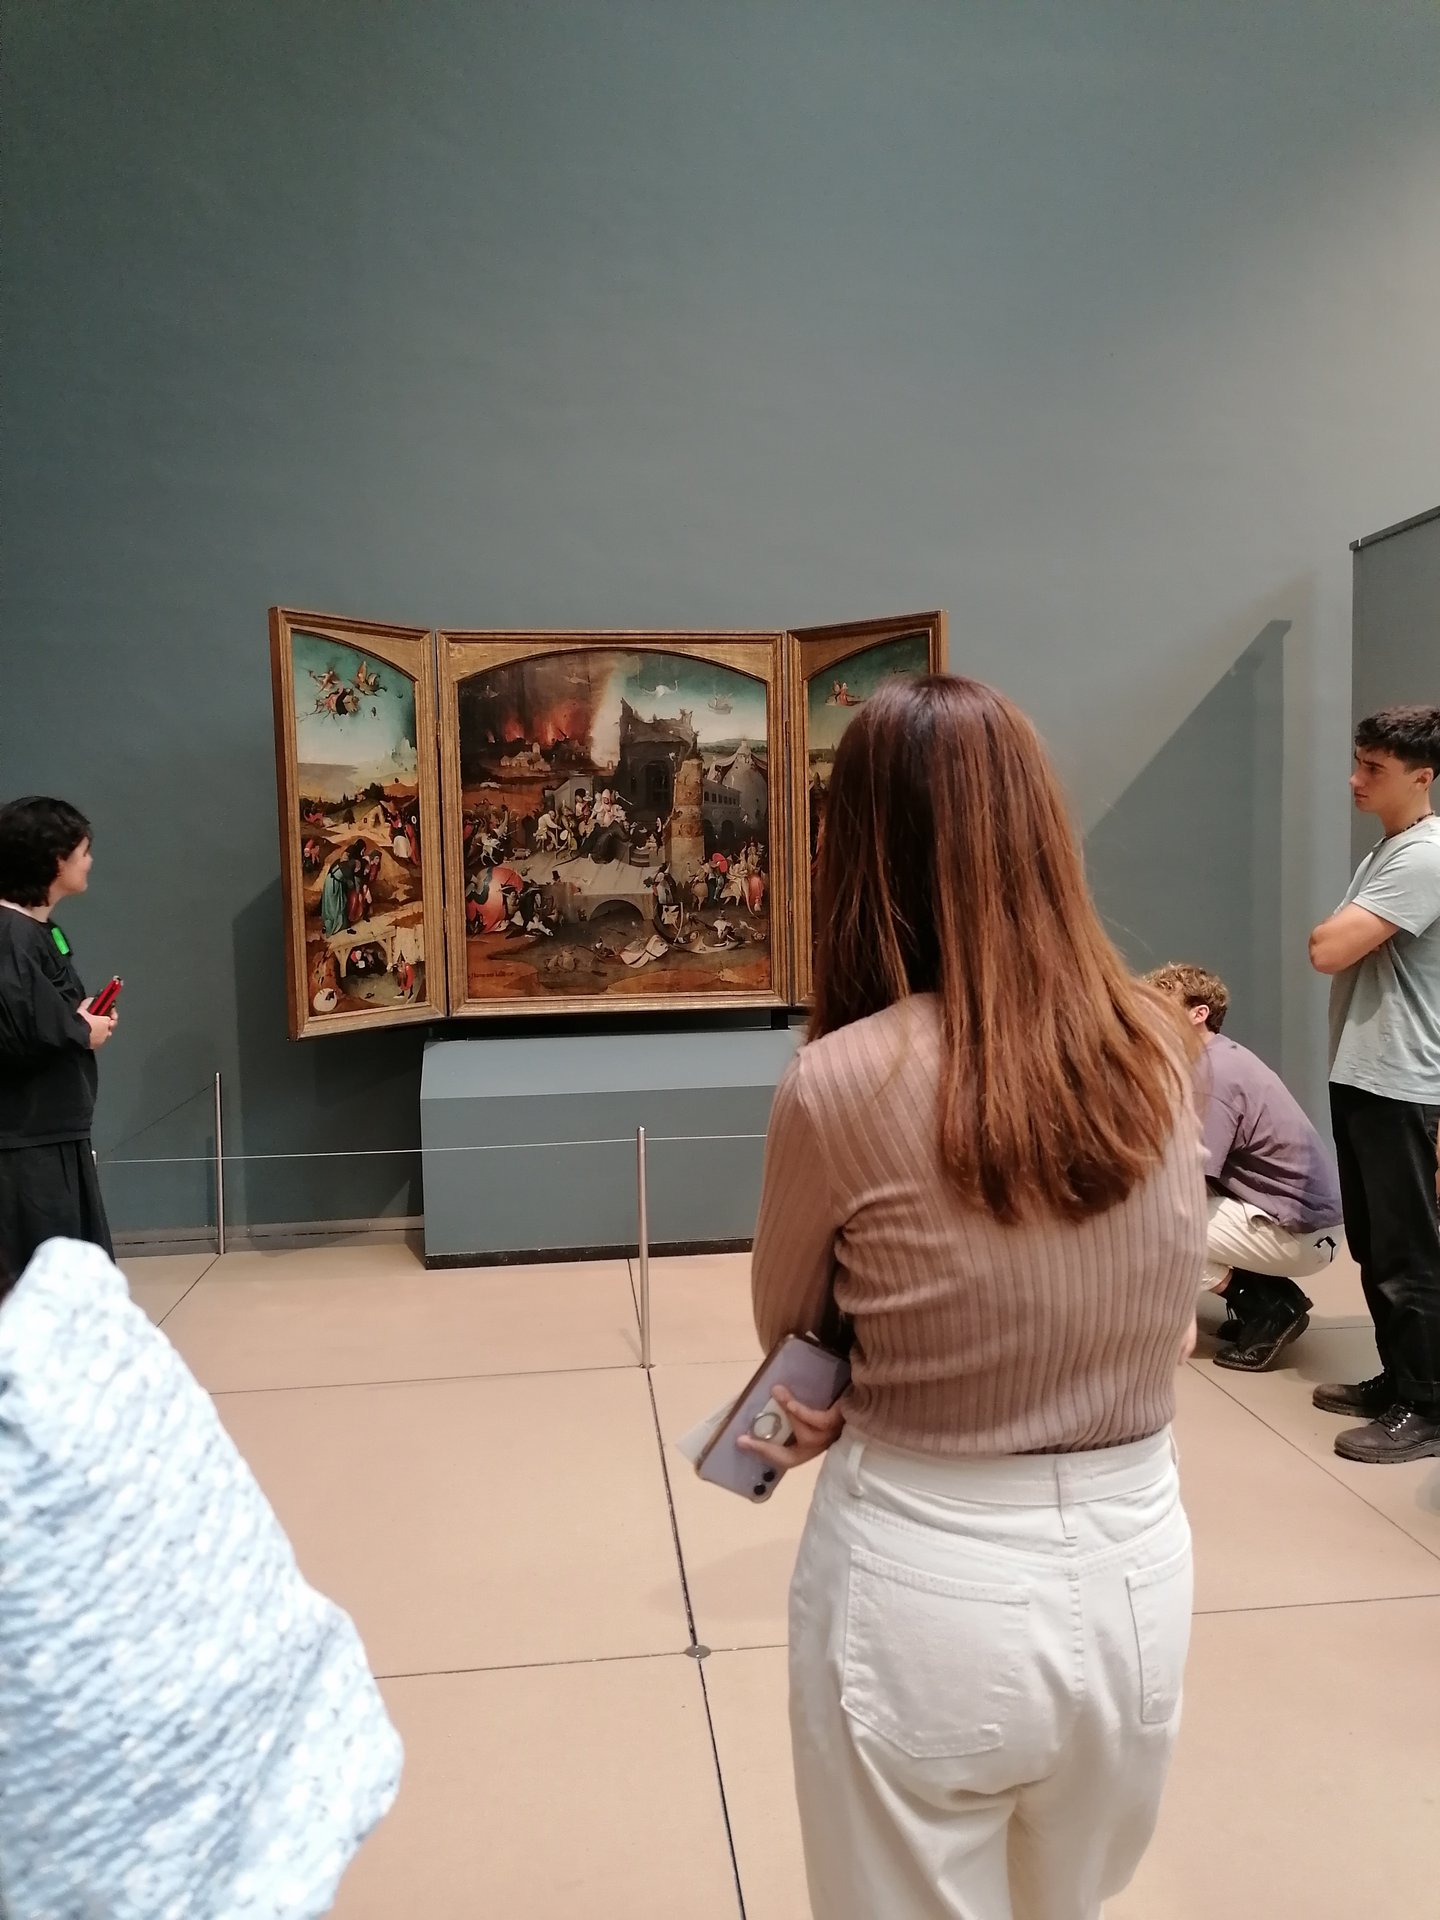 Student looking at picture in a museum